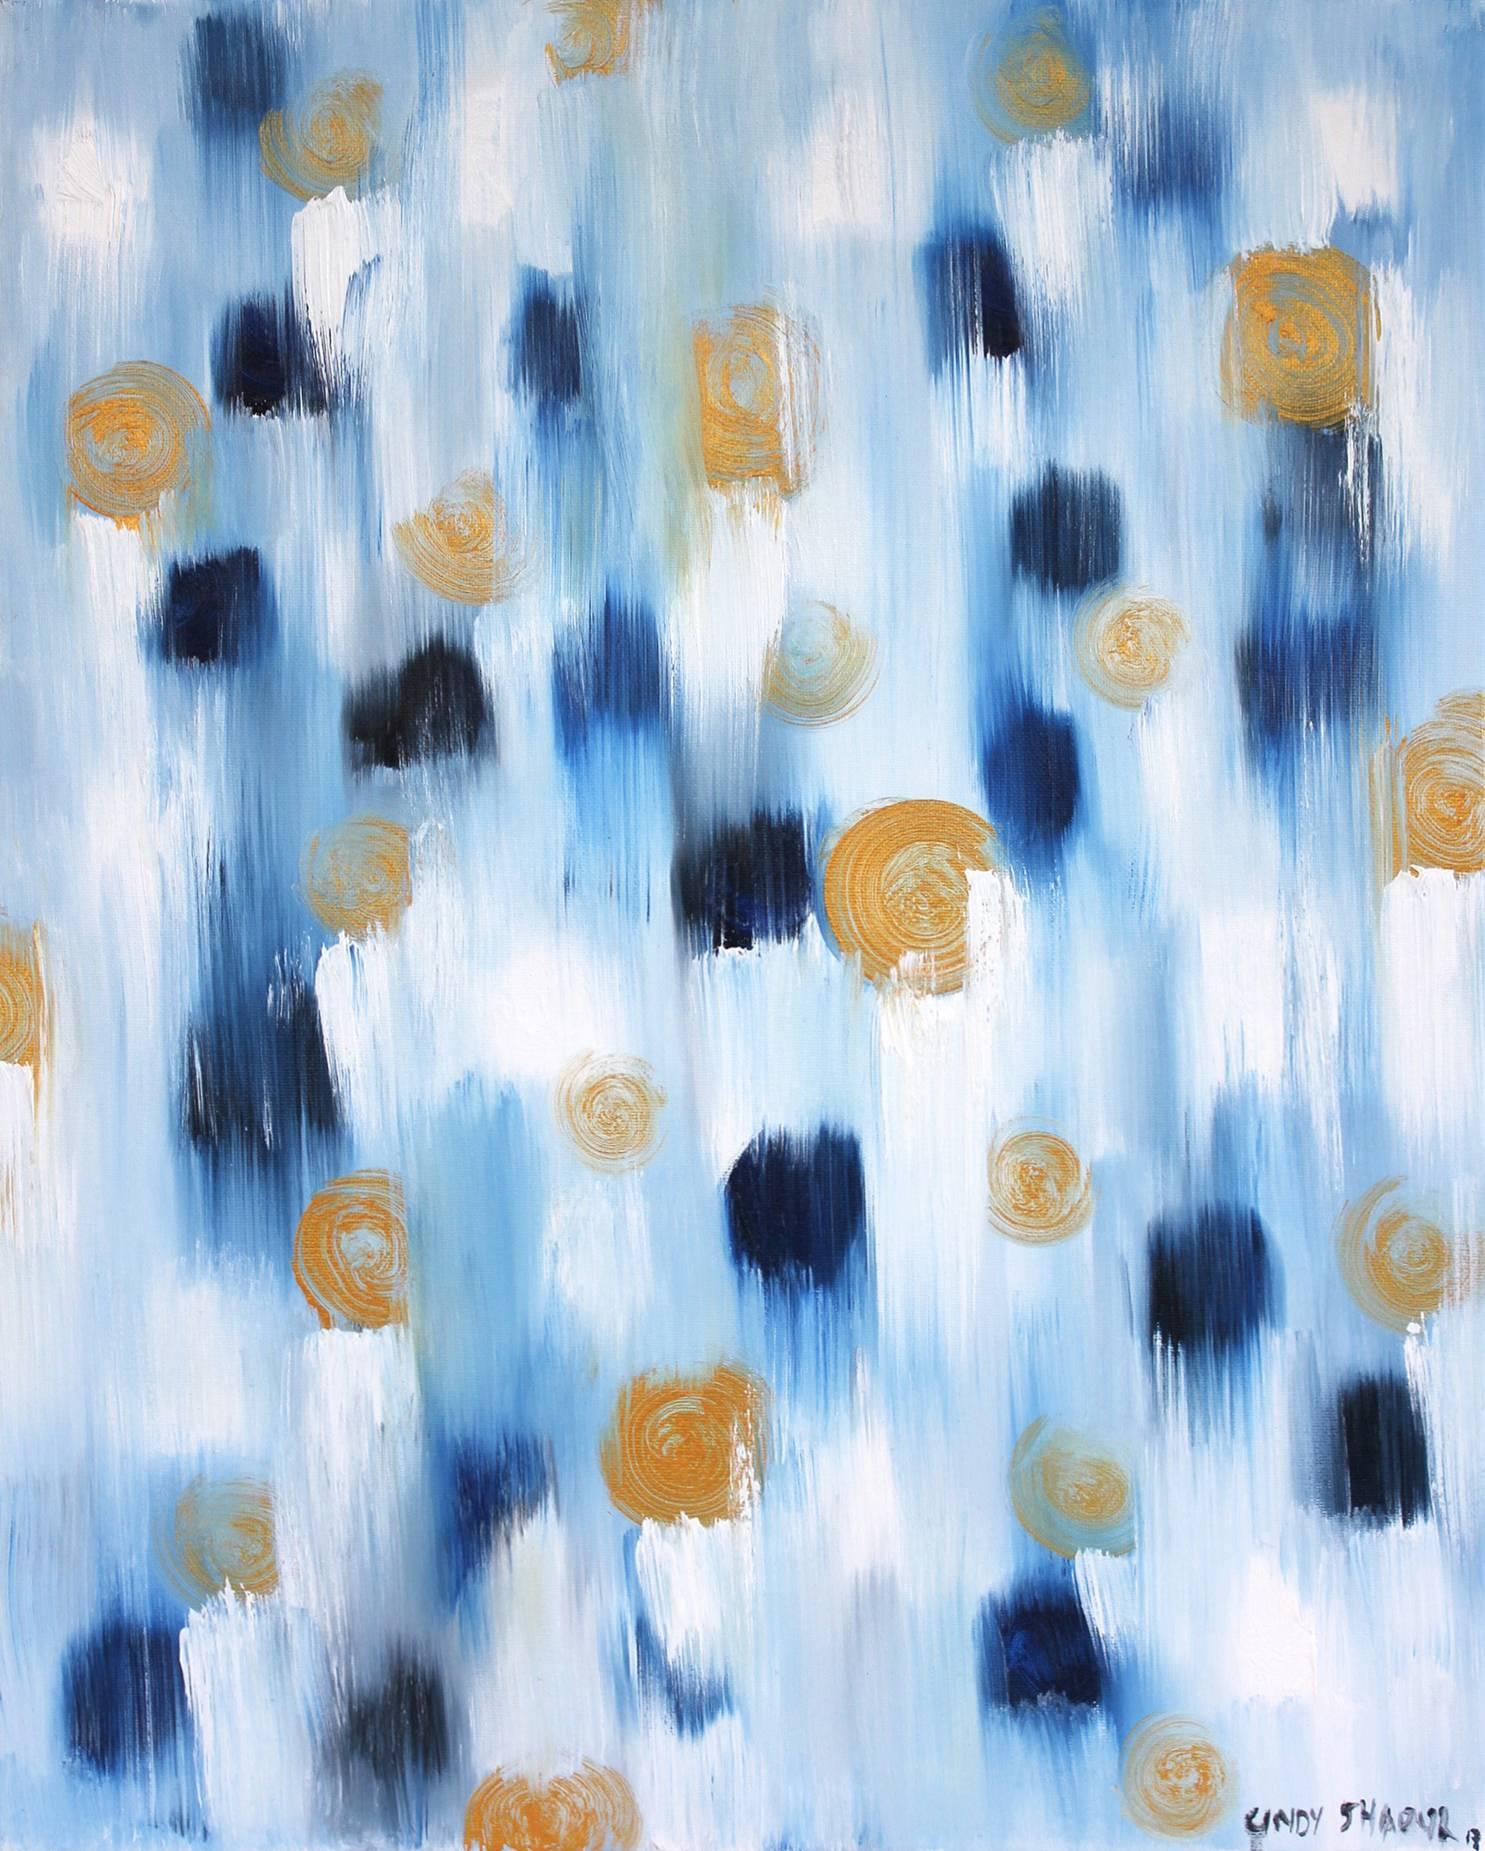 Dripping Dots, Golden Winter Storm - Painting by Cindy Shaoul